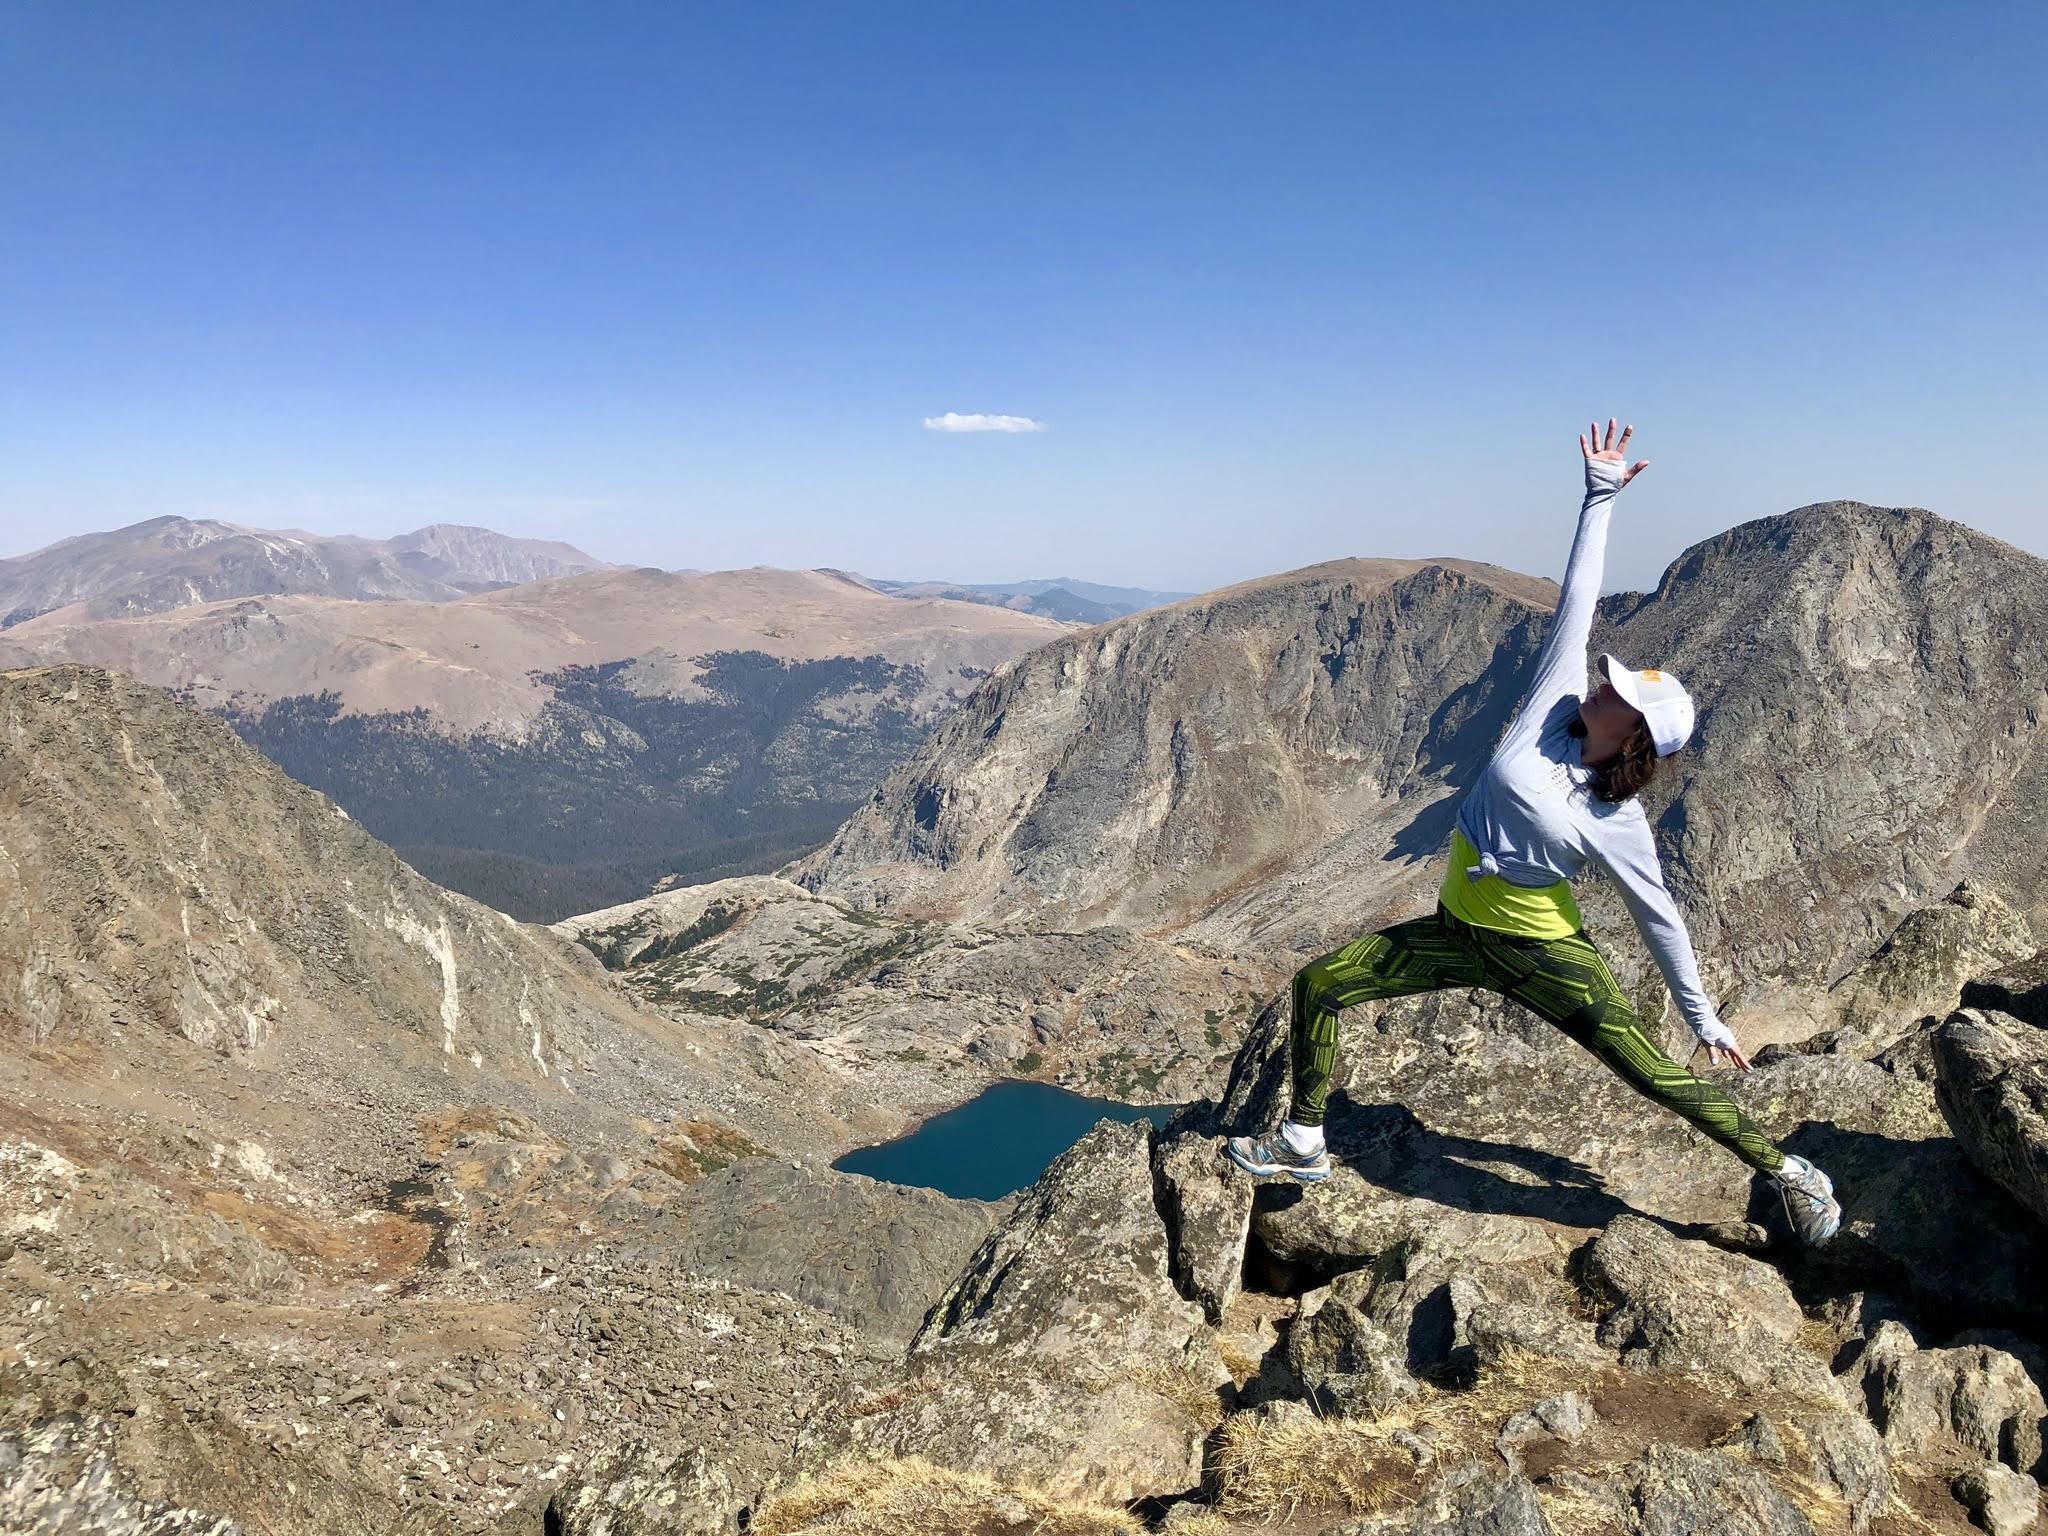 Meredith Garofalo At the top of Mount Ida, almost 13,000 feet up in the northern Front Range of the Rocky Mountains in Colorado.